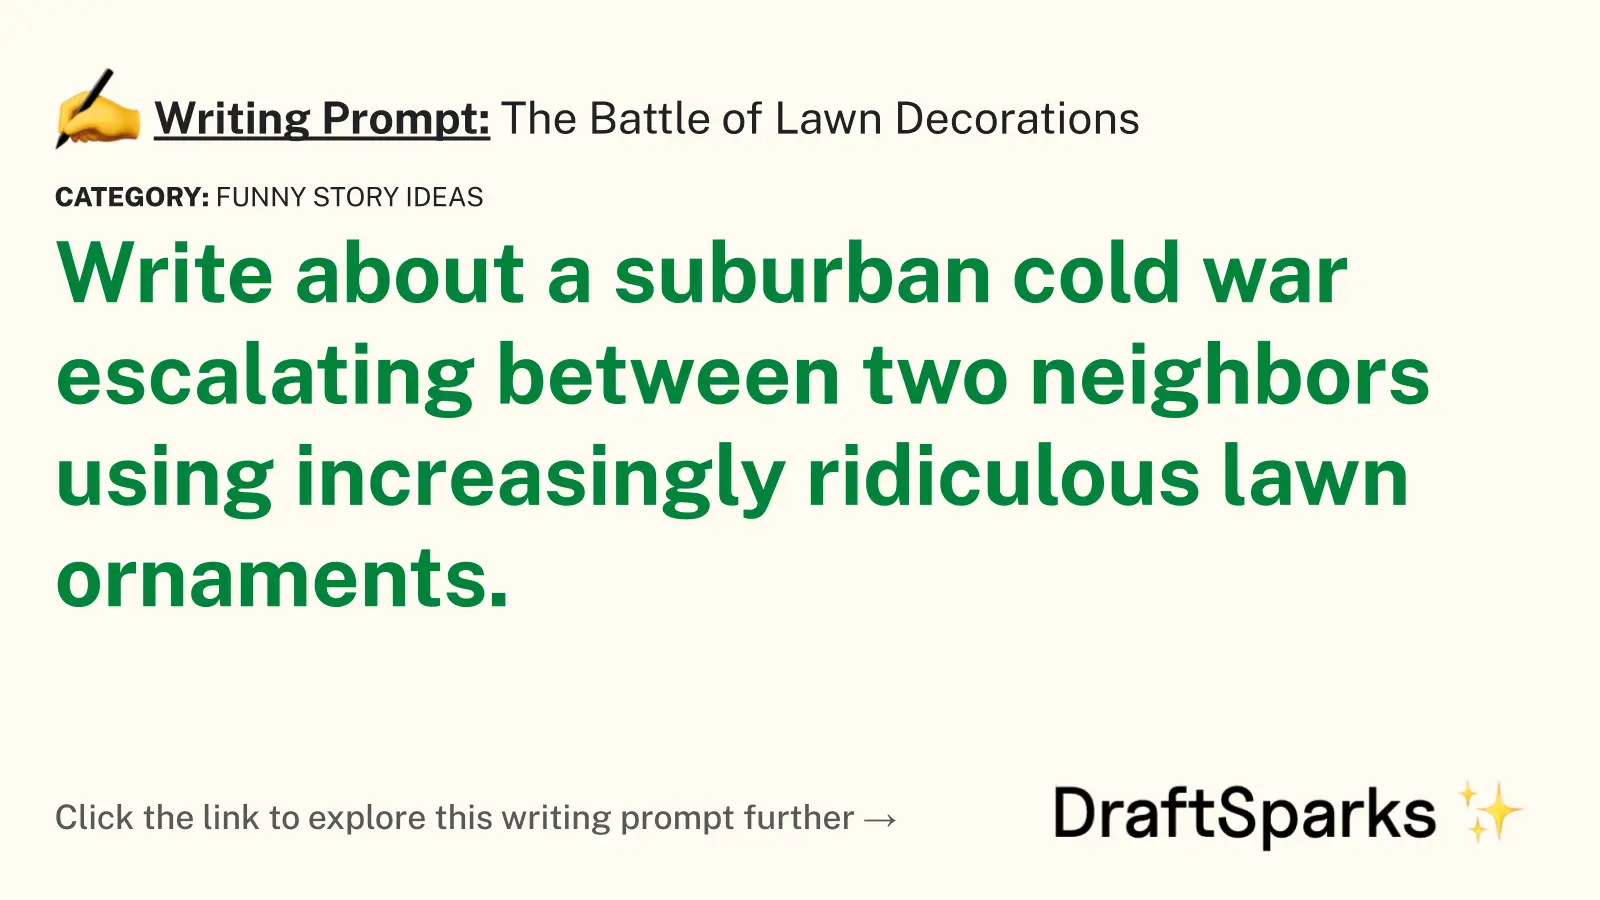 The Battle of Lawn Decorations